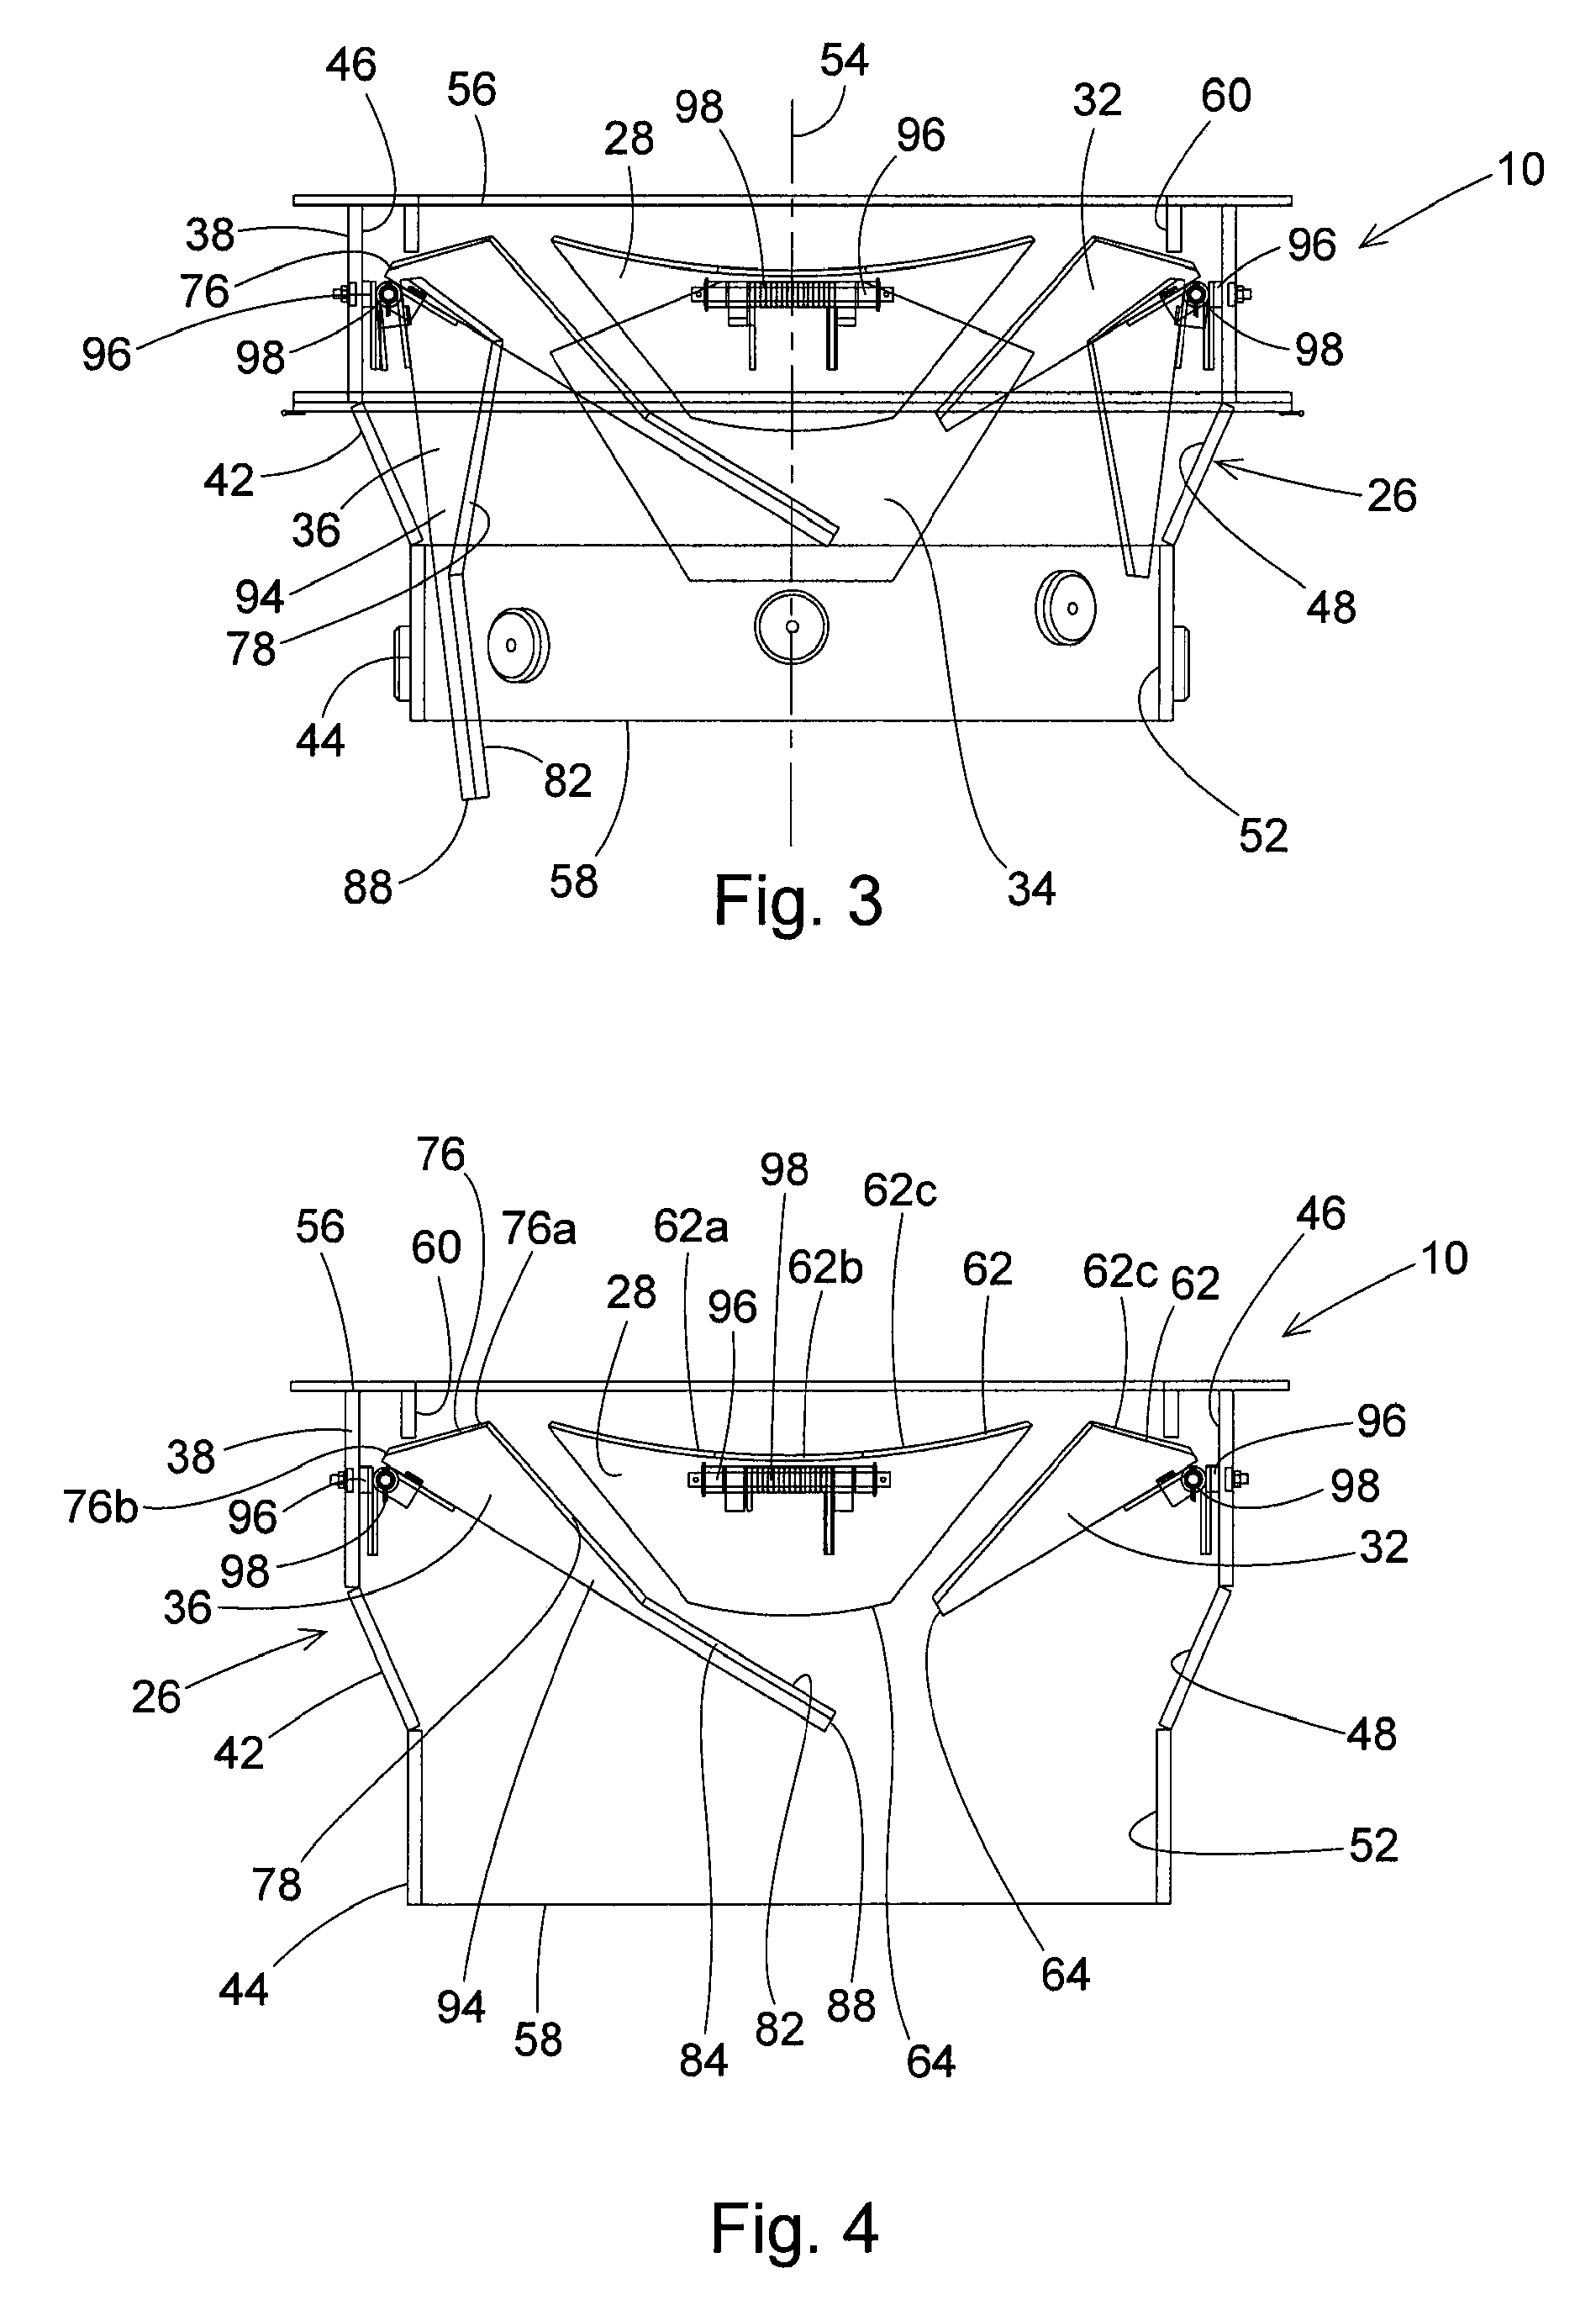 Adjustable aperture apparatus that retains dust from bulk material directed through the apparatus